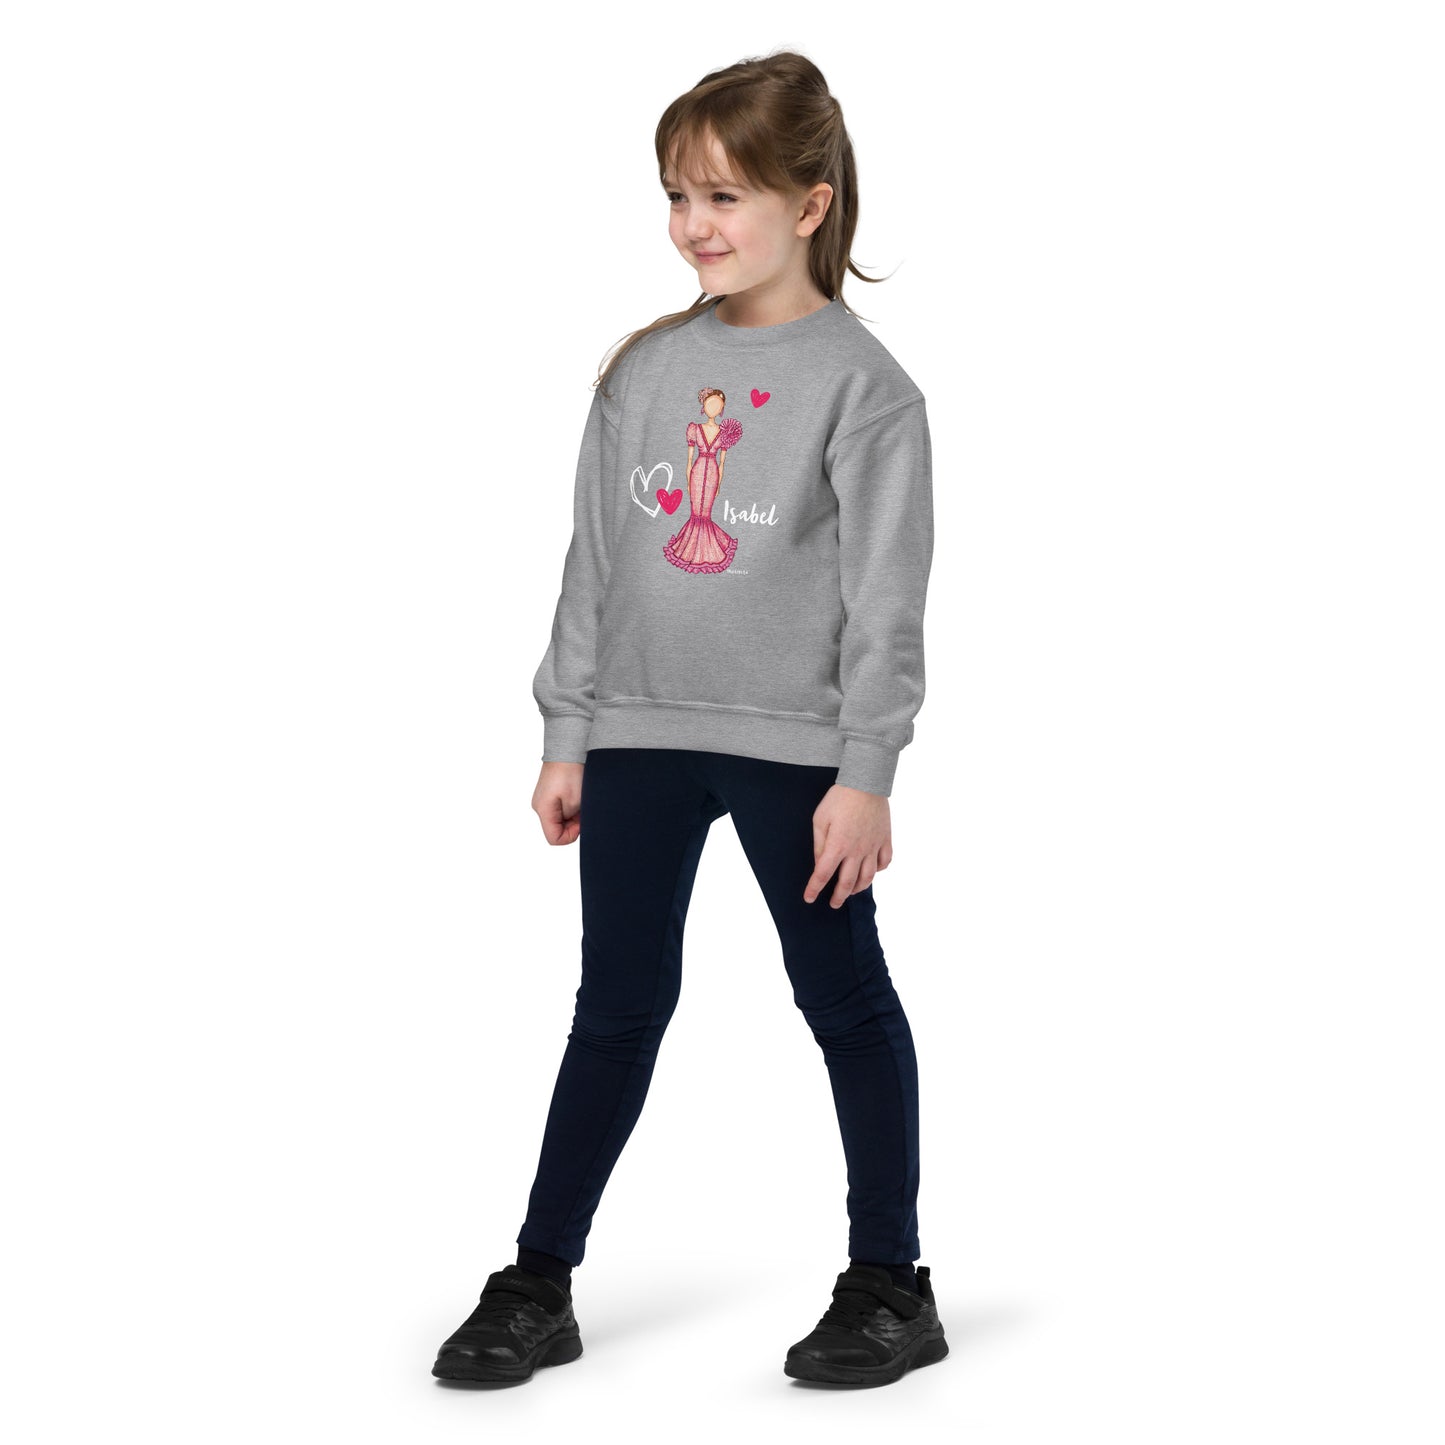 a little girl wearing a sweatshirt with a princess on it